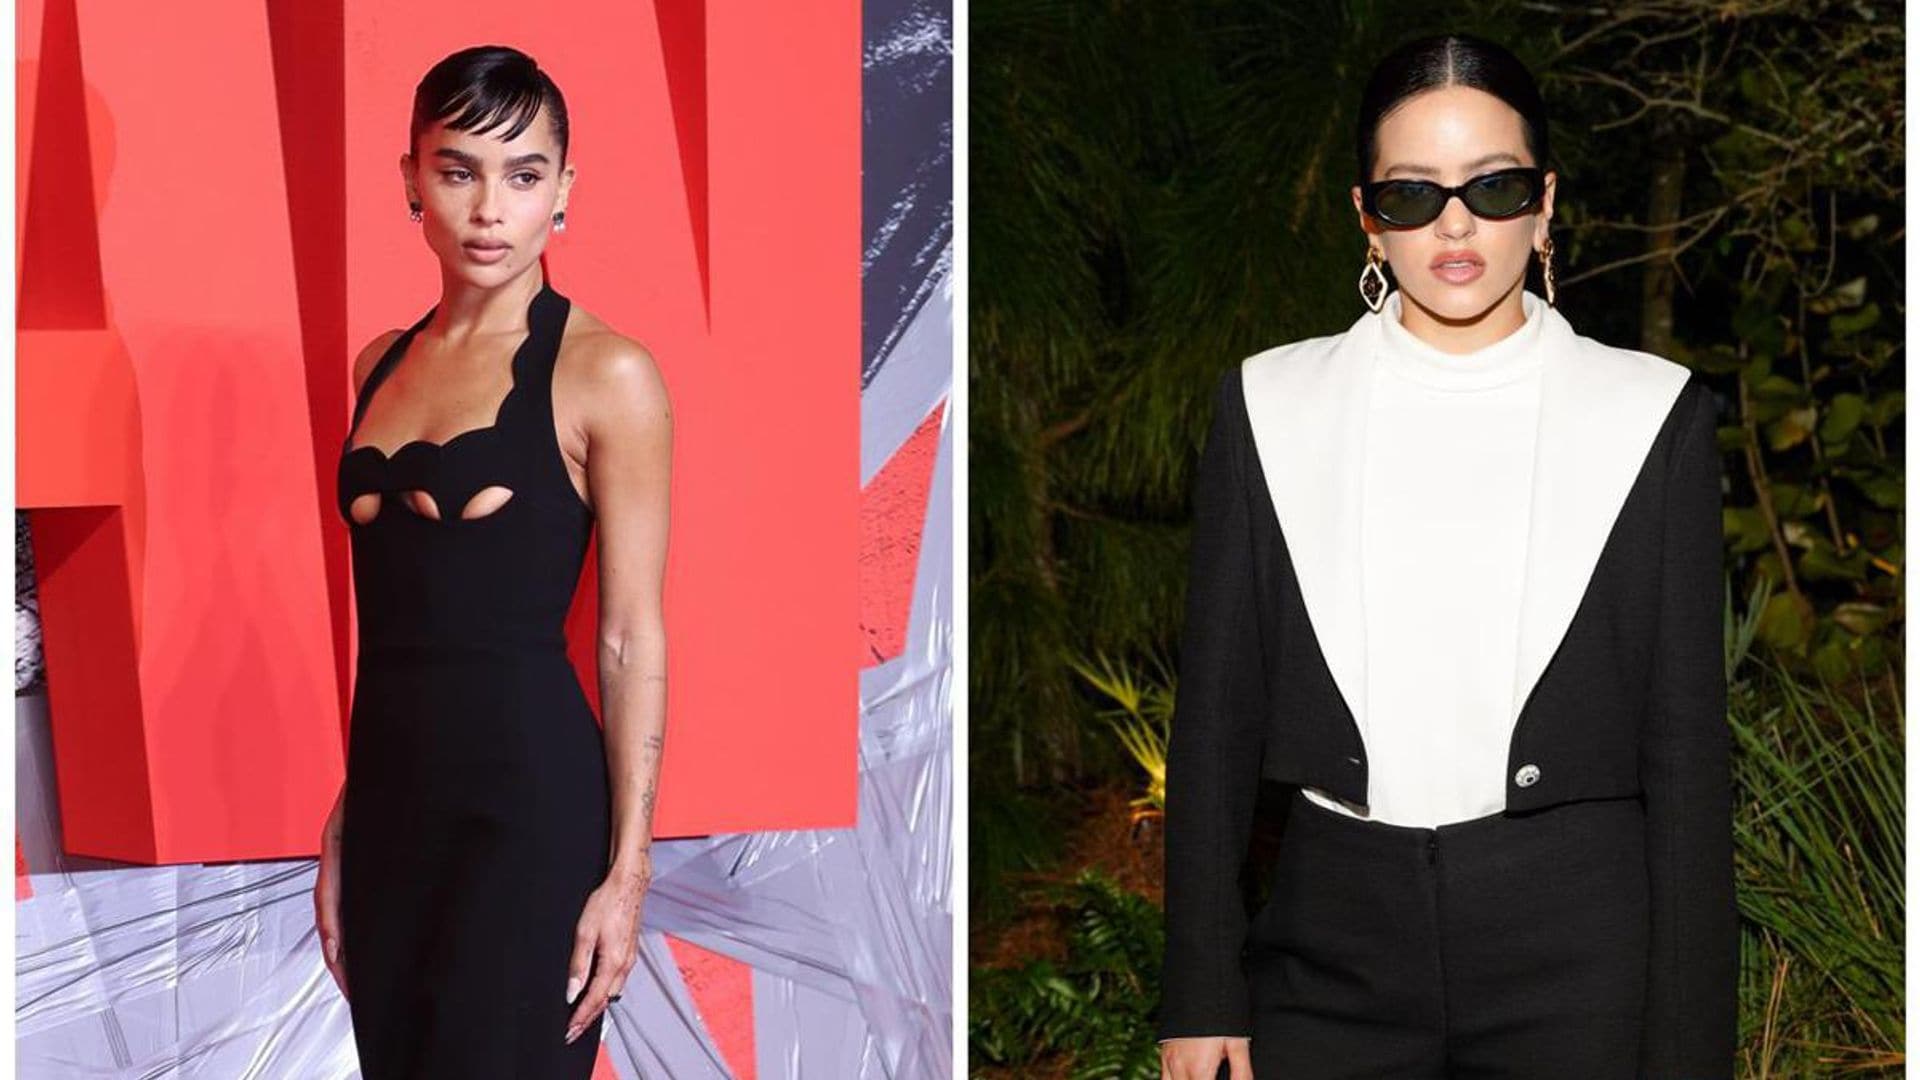 Zoe Kravitz and Rosalia to host and perform in SNL